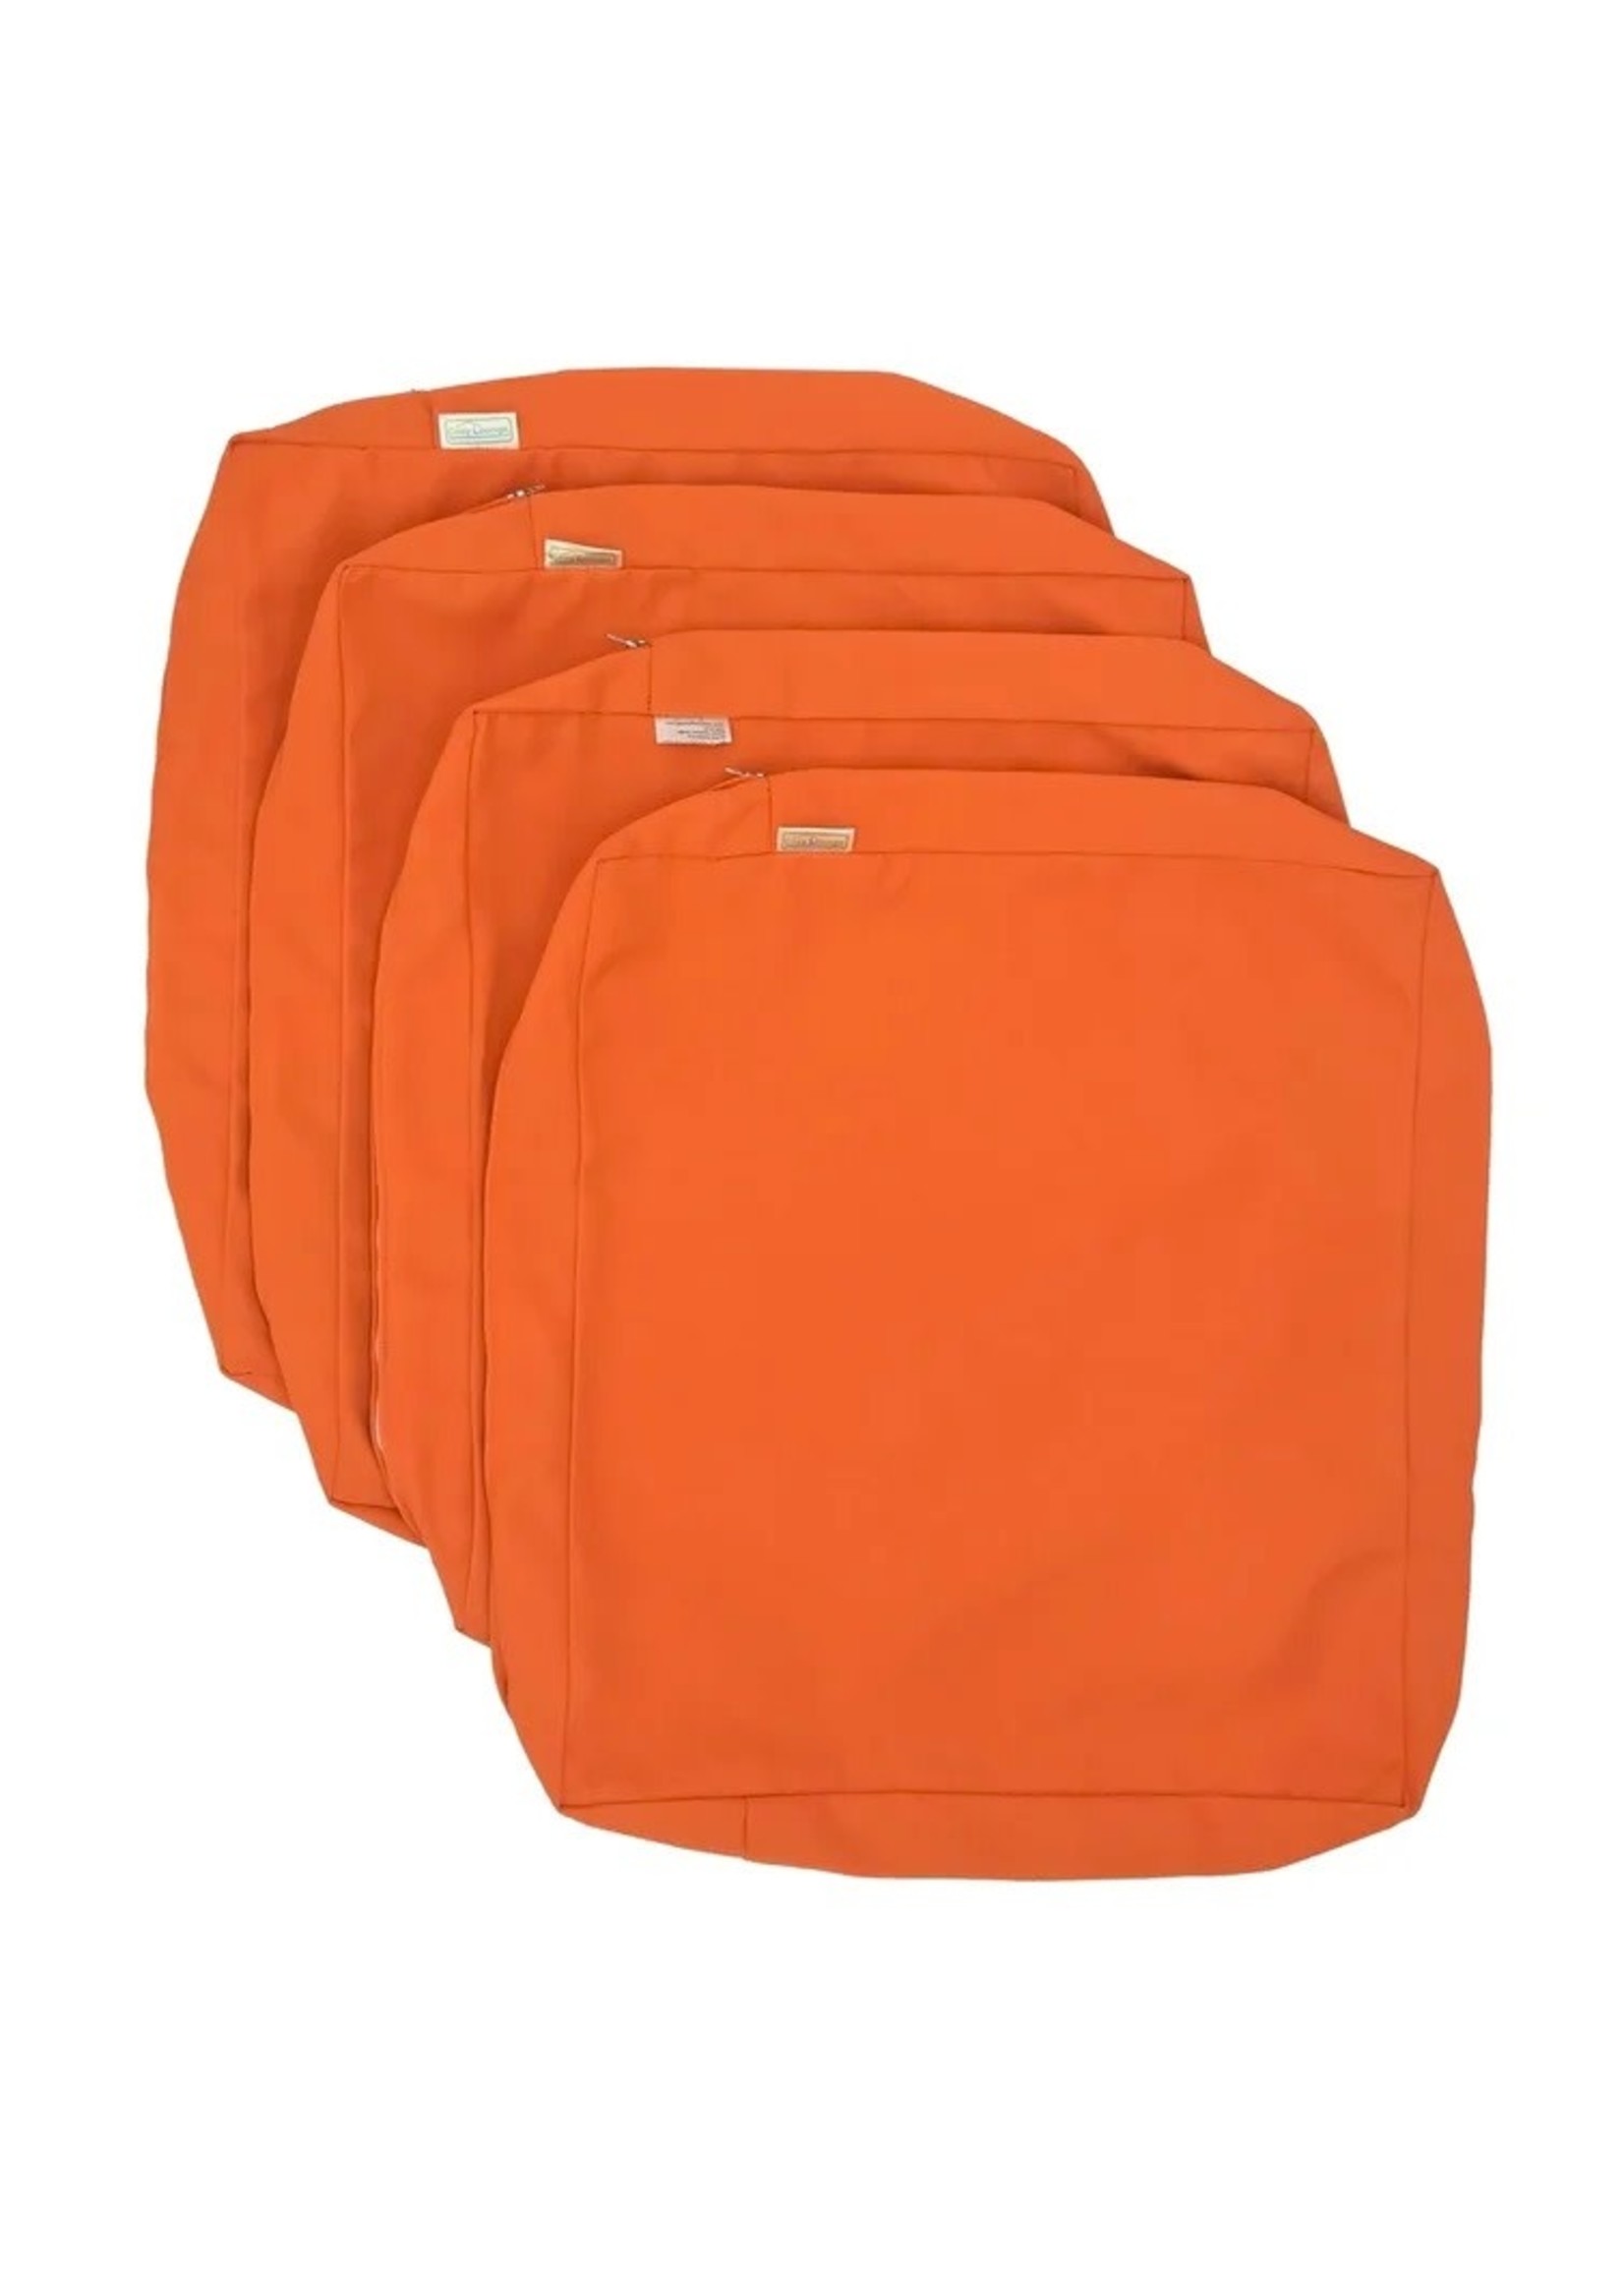 *COVERS ONLY - 17.5" x 18" Indoor/Outdoor Dining Chair Cushion Covers - Set of 4 - Orange - Final Sale